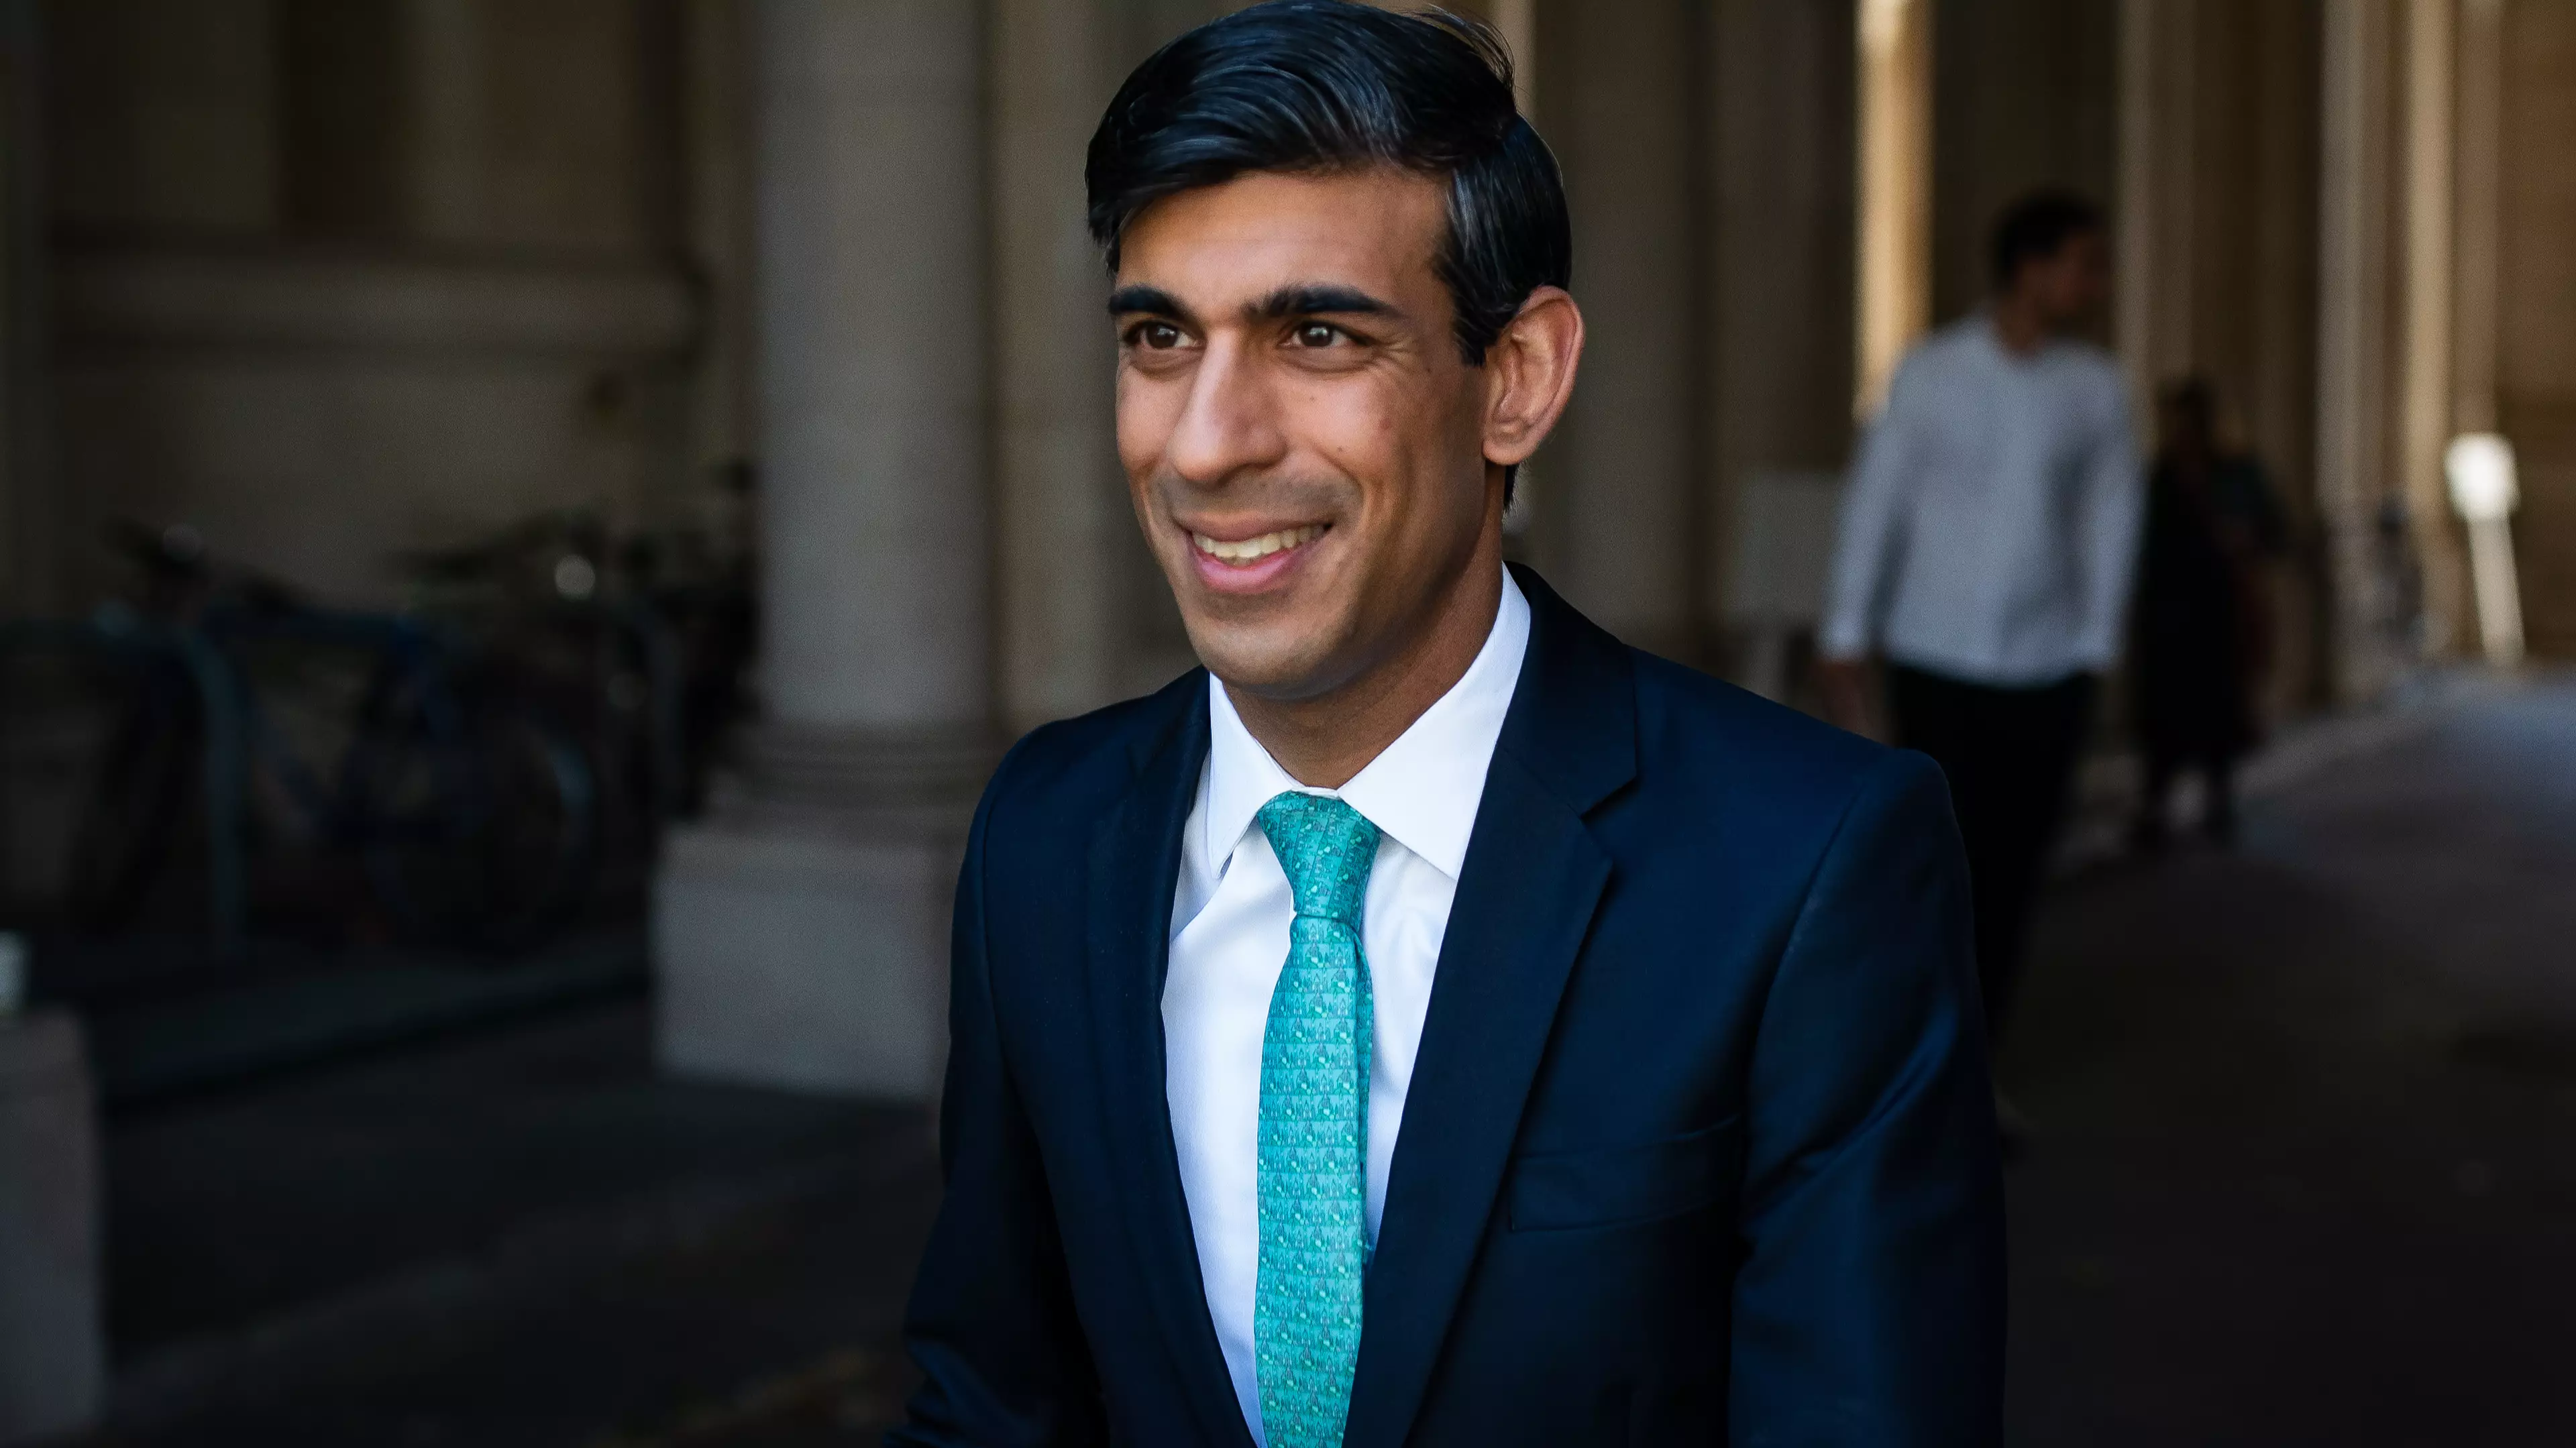 MPs And Campaigners Call On Rishi Sunak To Consider Four-Day Working Week